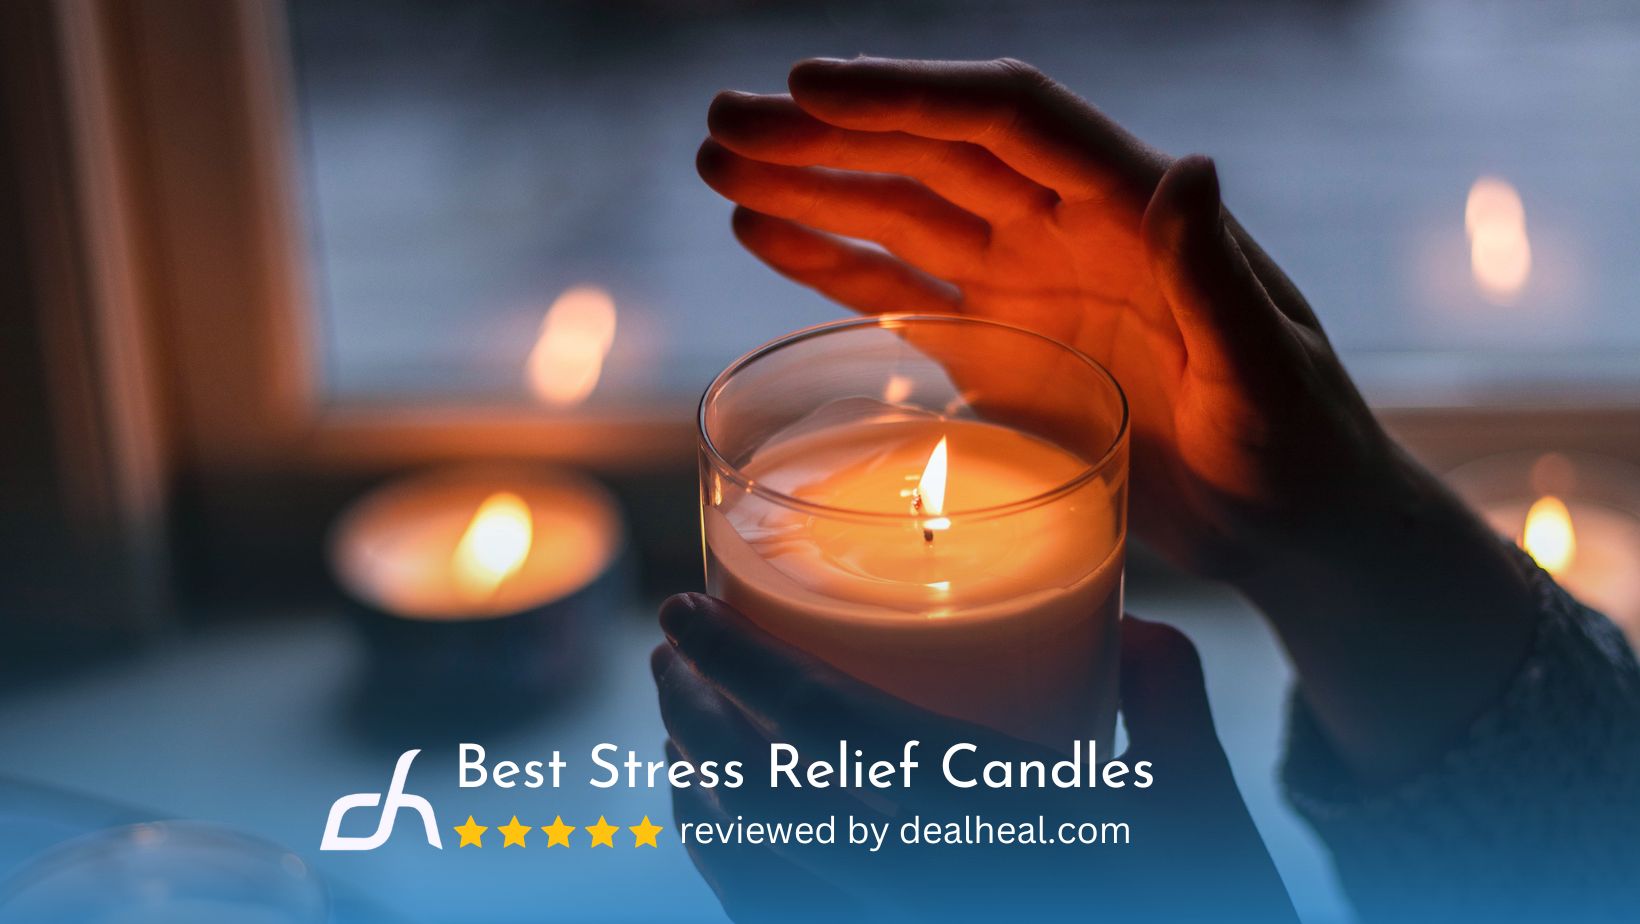 Top 16 Best Stress Relief Candles Review - DealHeal